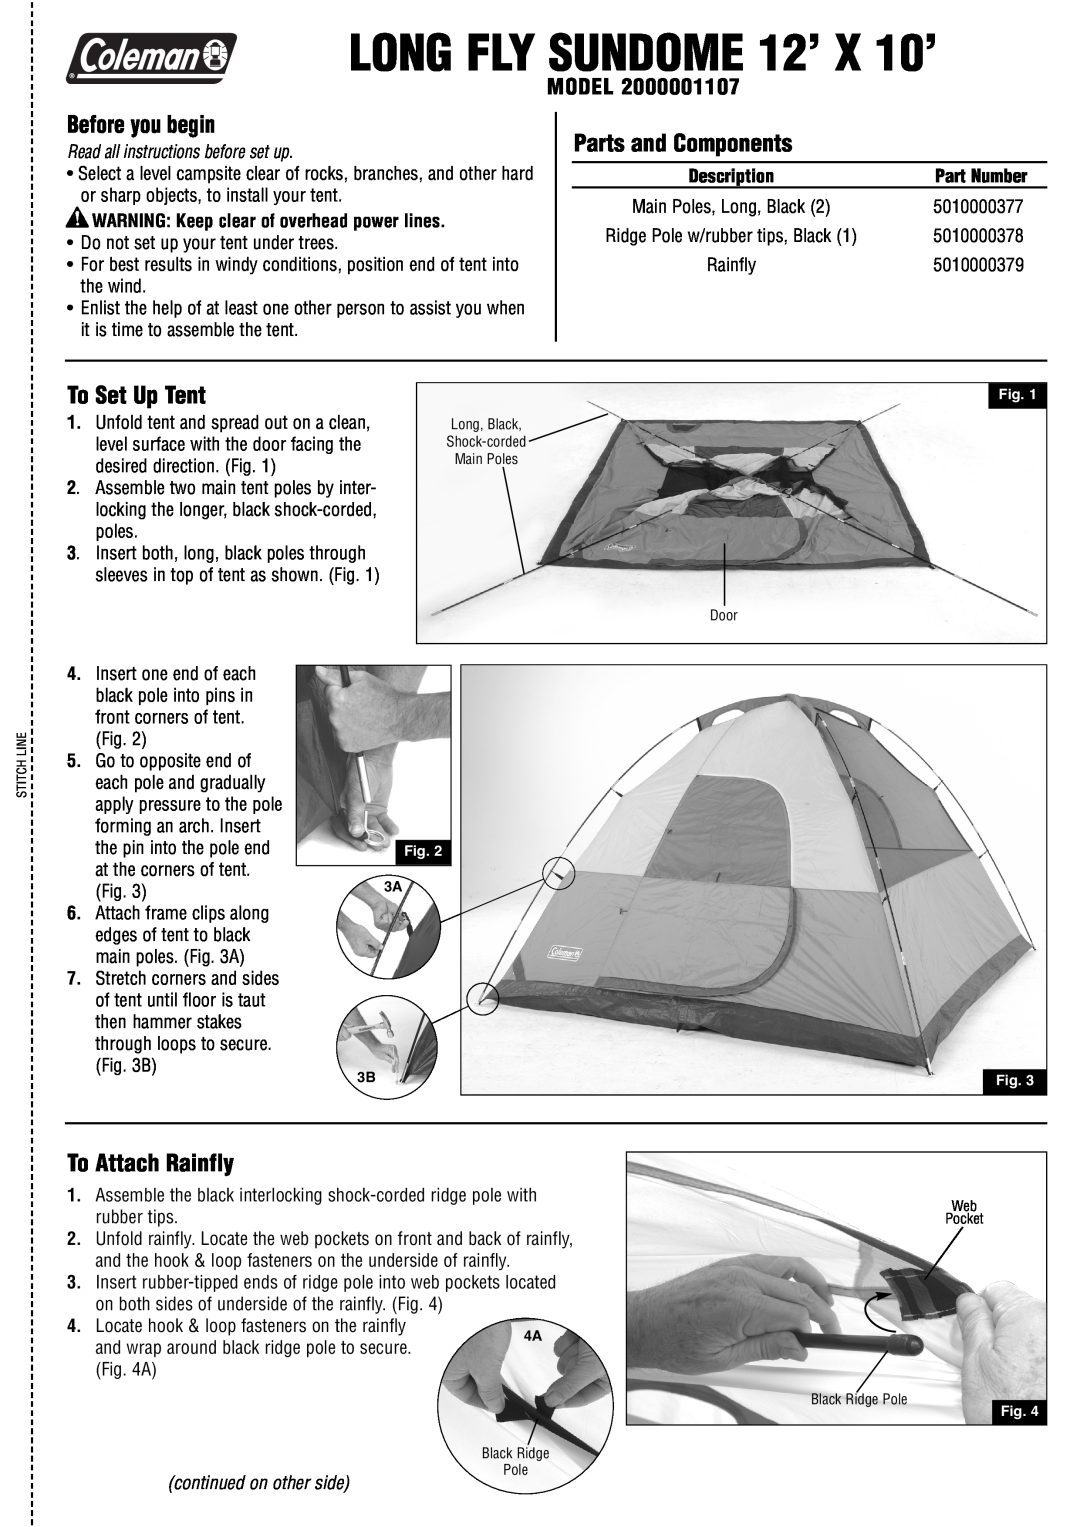 Coleman 2000001107 manual Before you begin, Parts and Components, To Set Up Tent, To Attach Rainfly, Part Number, Model 